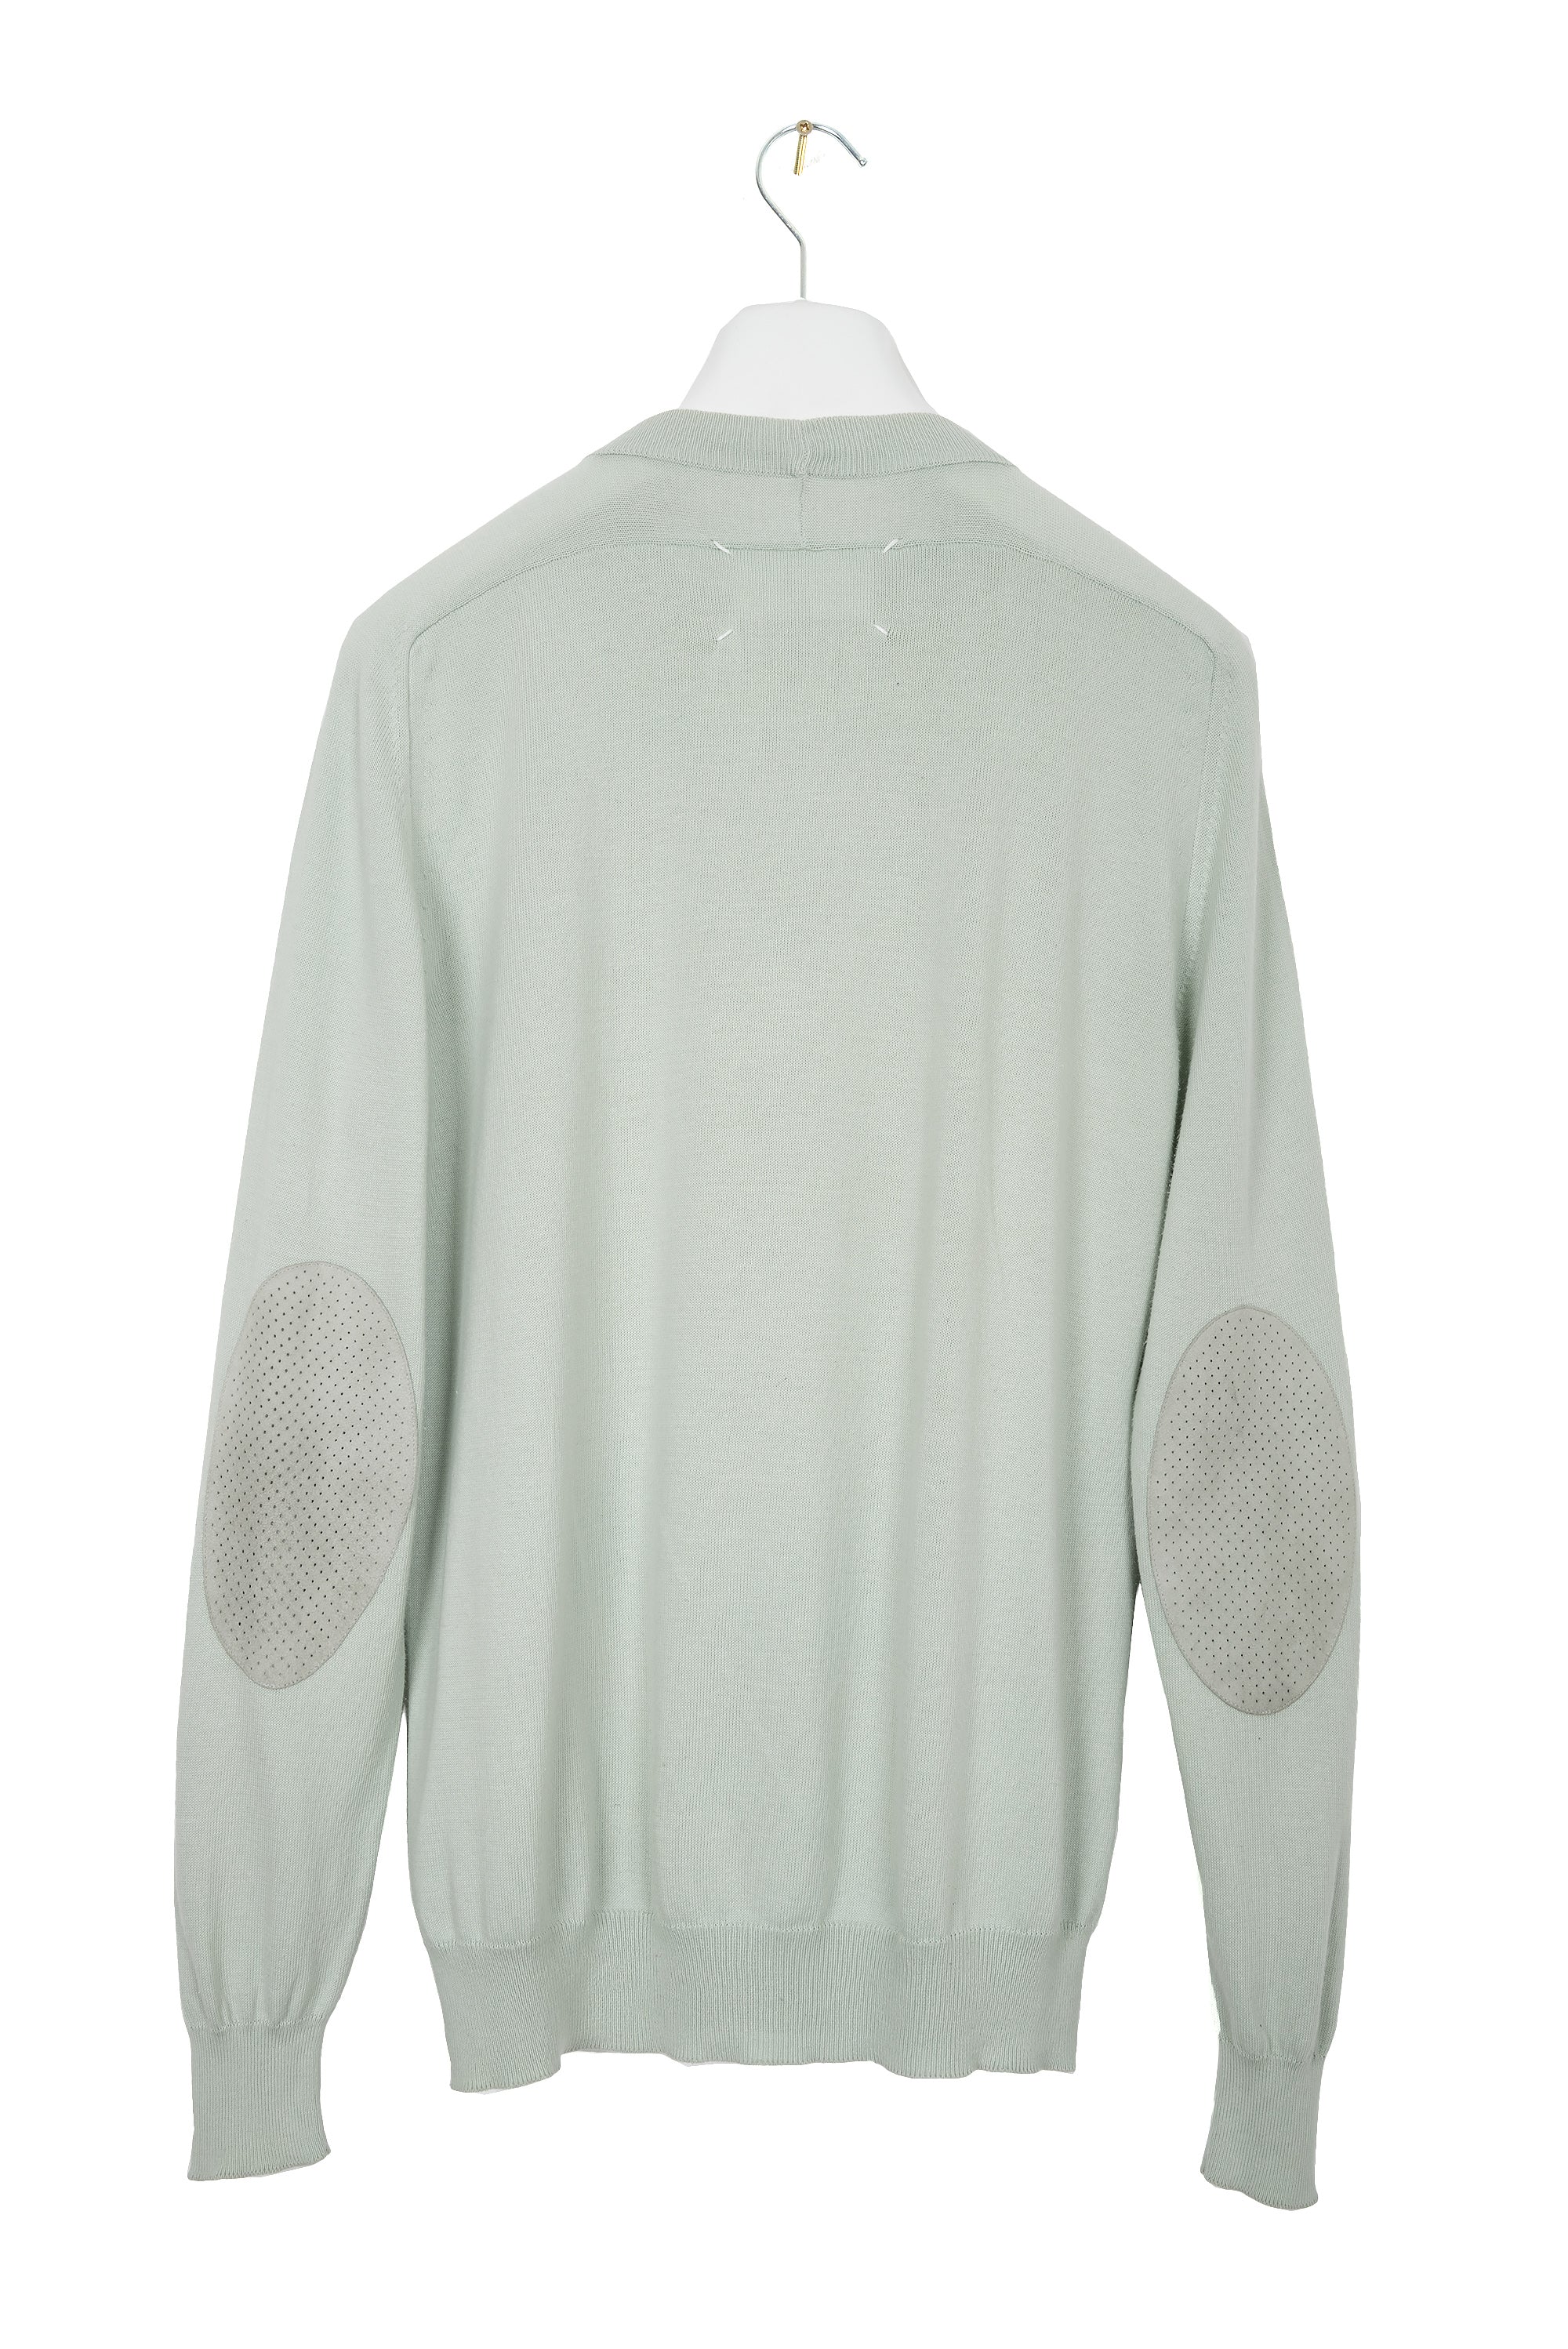 2009 S/S HAMMER SLEEVE CREWNECK WITH SUEDE ELBOW PATCH